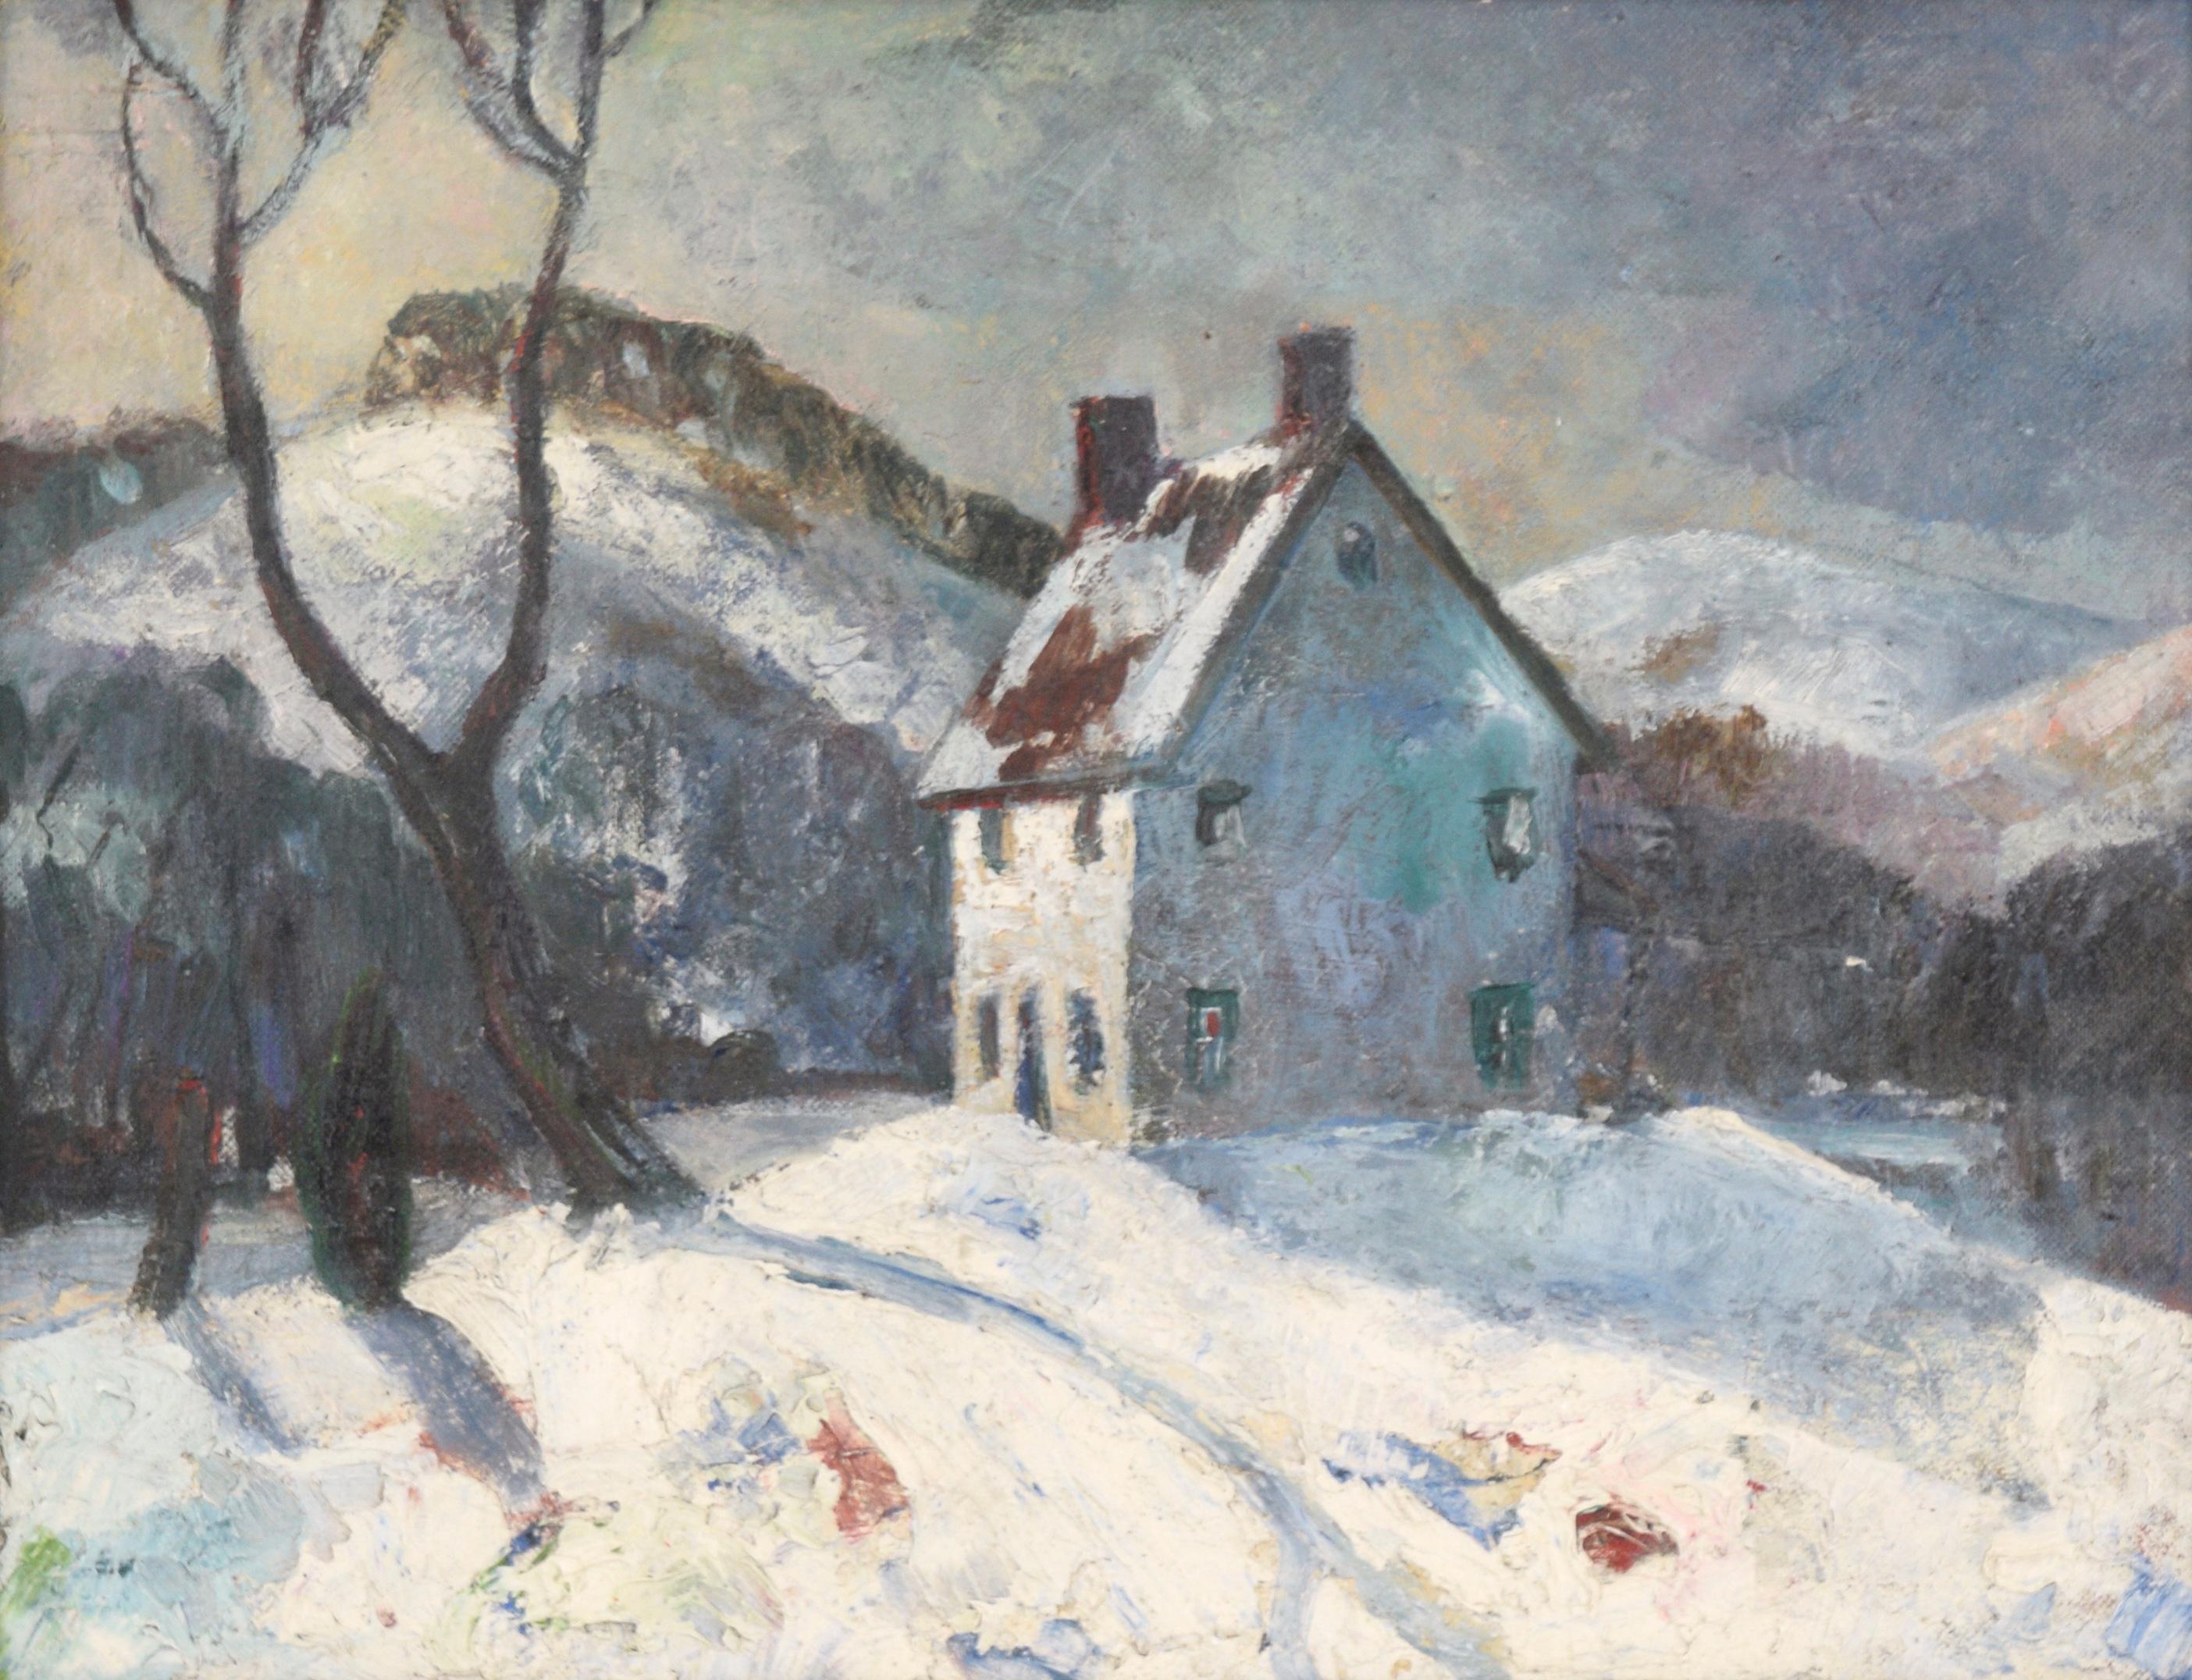 Melting Snow on the Cabin - Winter Landscape by Horace Shaw - Painting by Horace Dearborn Shaw